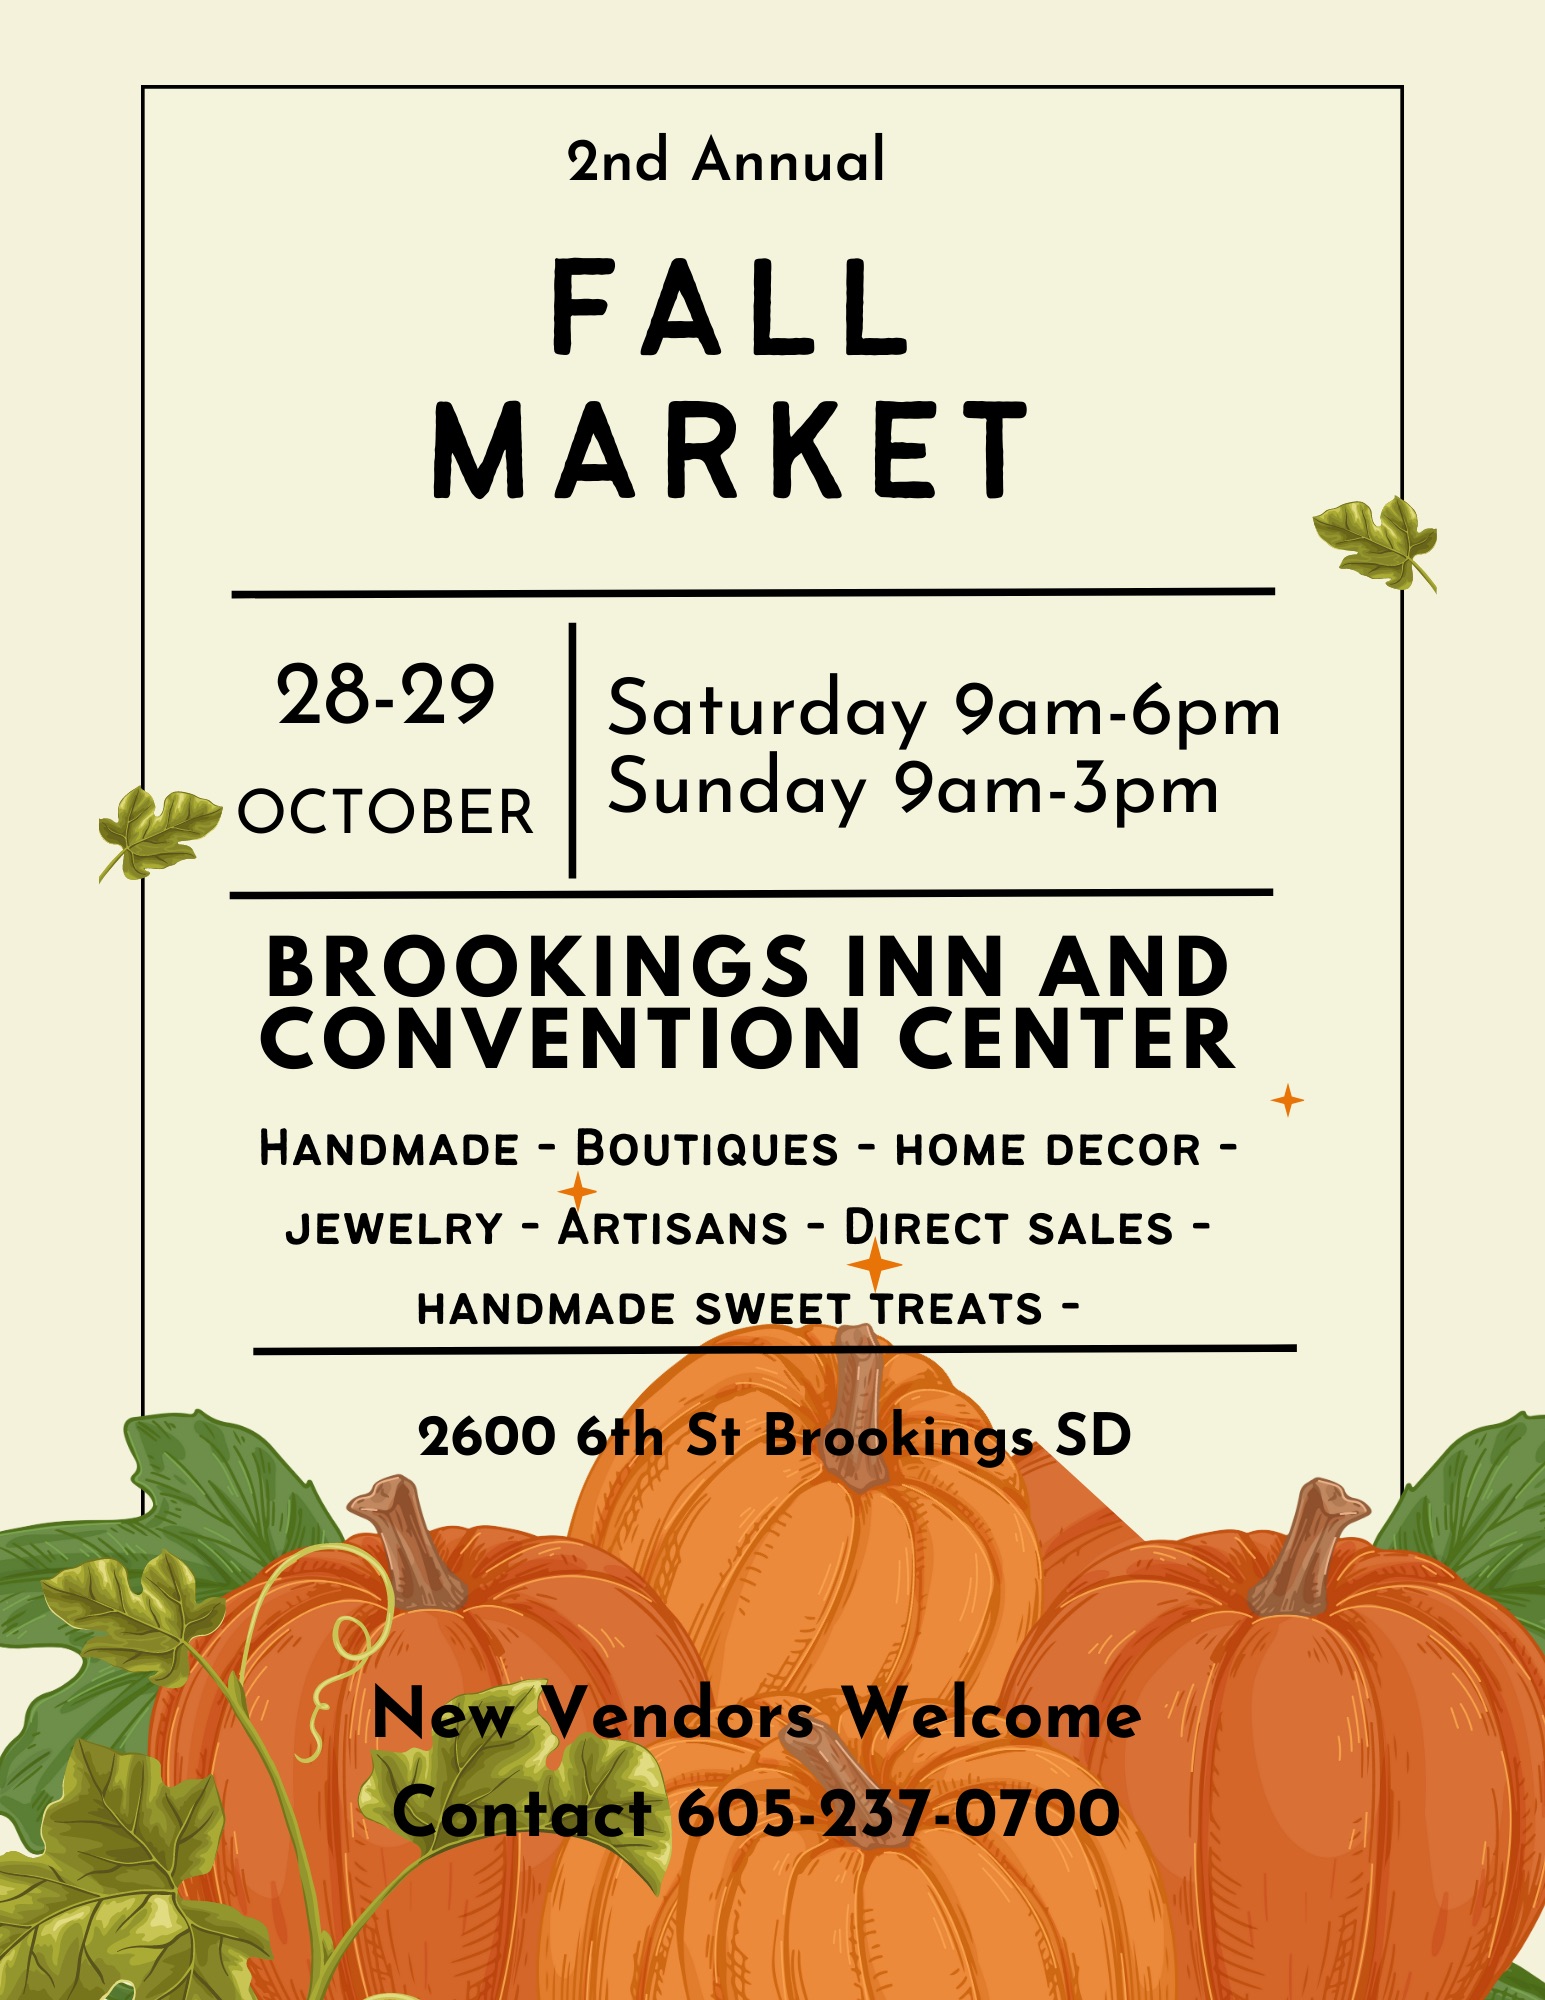 Fall Market (2nd Annual)